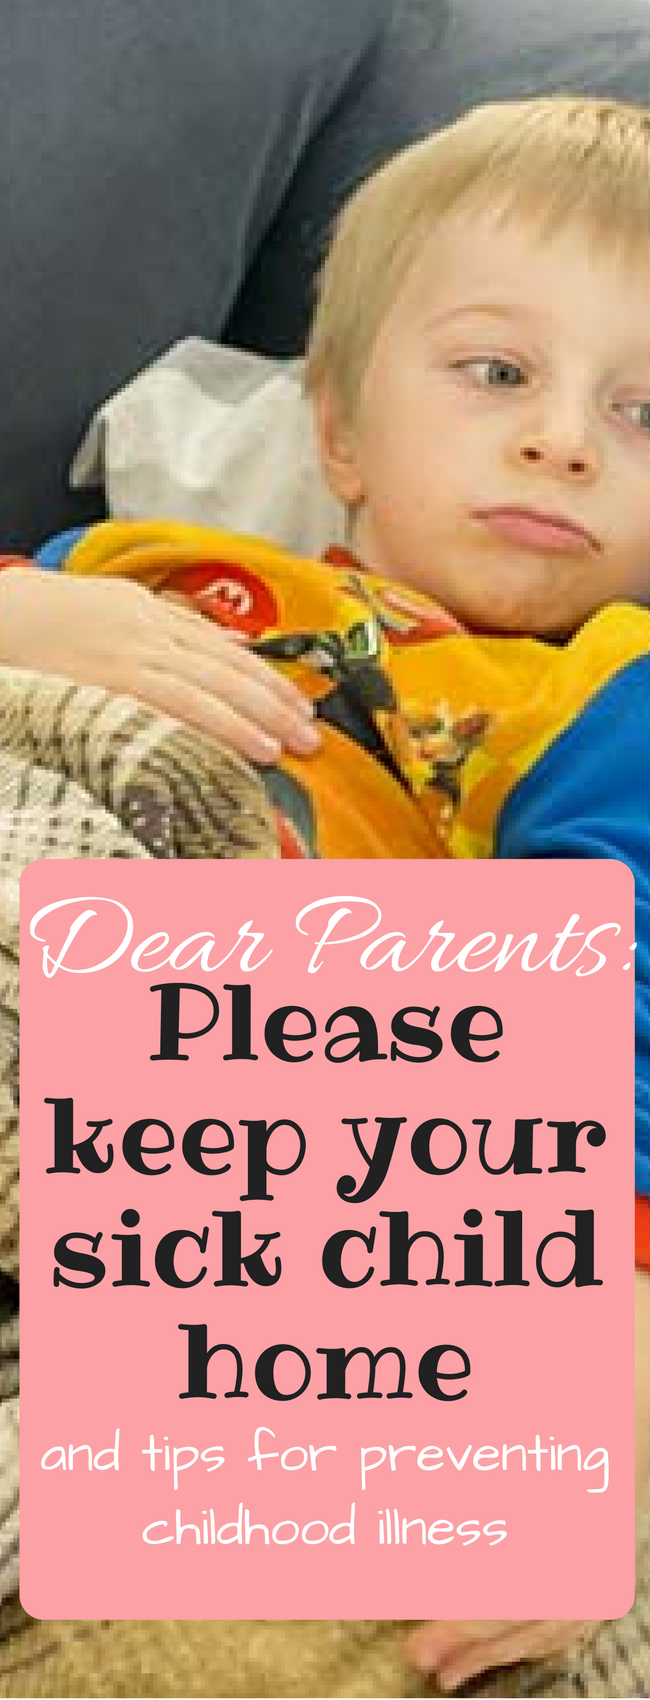 Dear Parents: Please Keep your Sick Children Home (and tips for keeping kids from getting sick). 